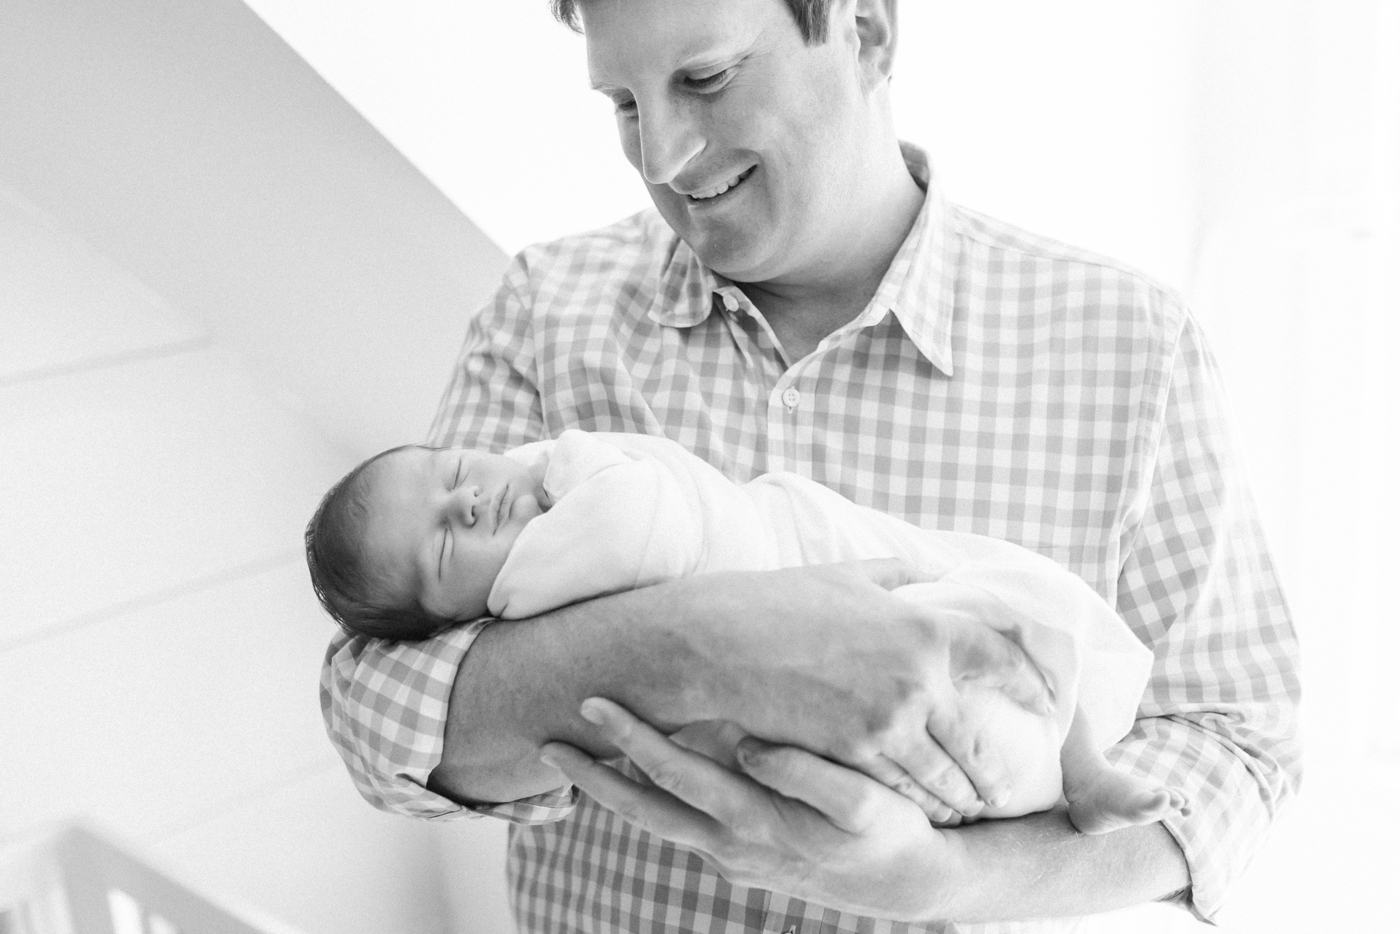 Black and white film photo of dad holding his new baby | Photo by Caitlyn Motycka Photography.